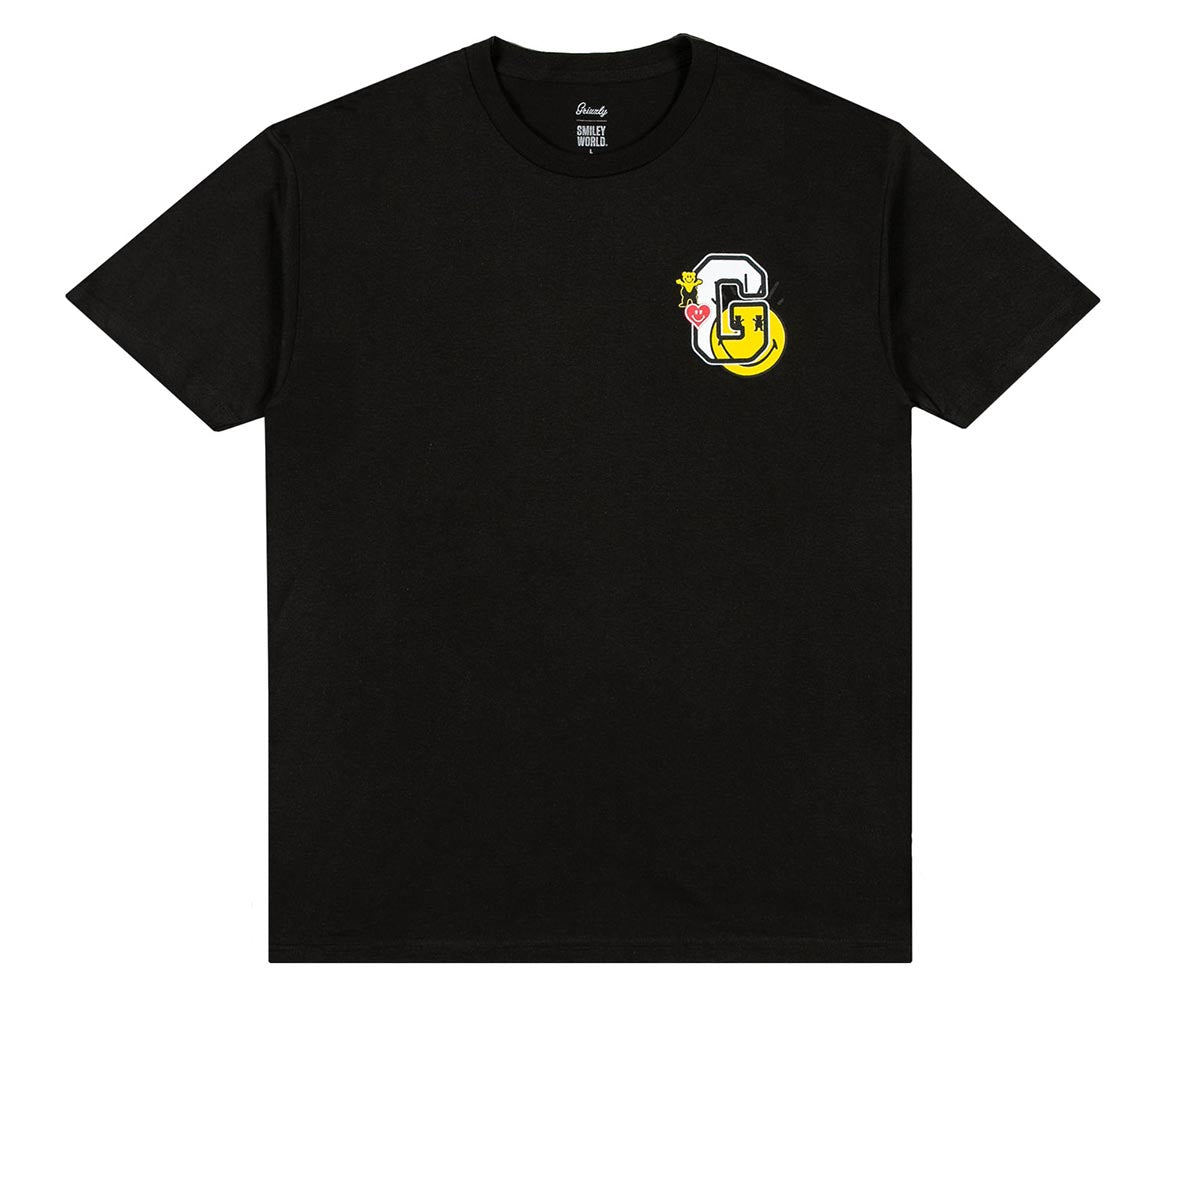 Grizzly x Smiley World T-Shirt - Black image 1